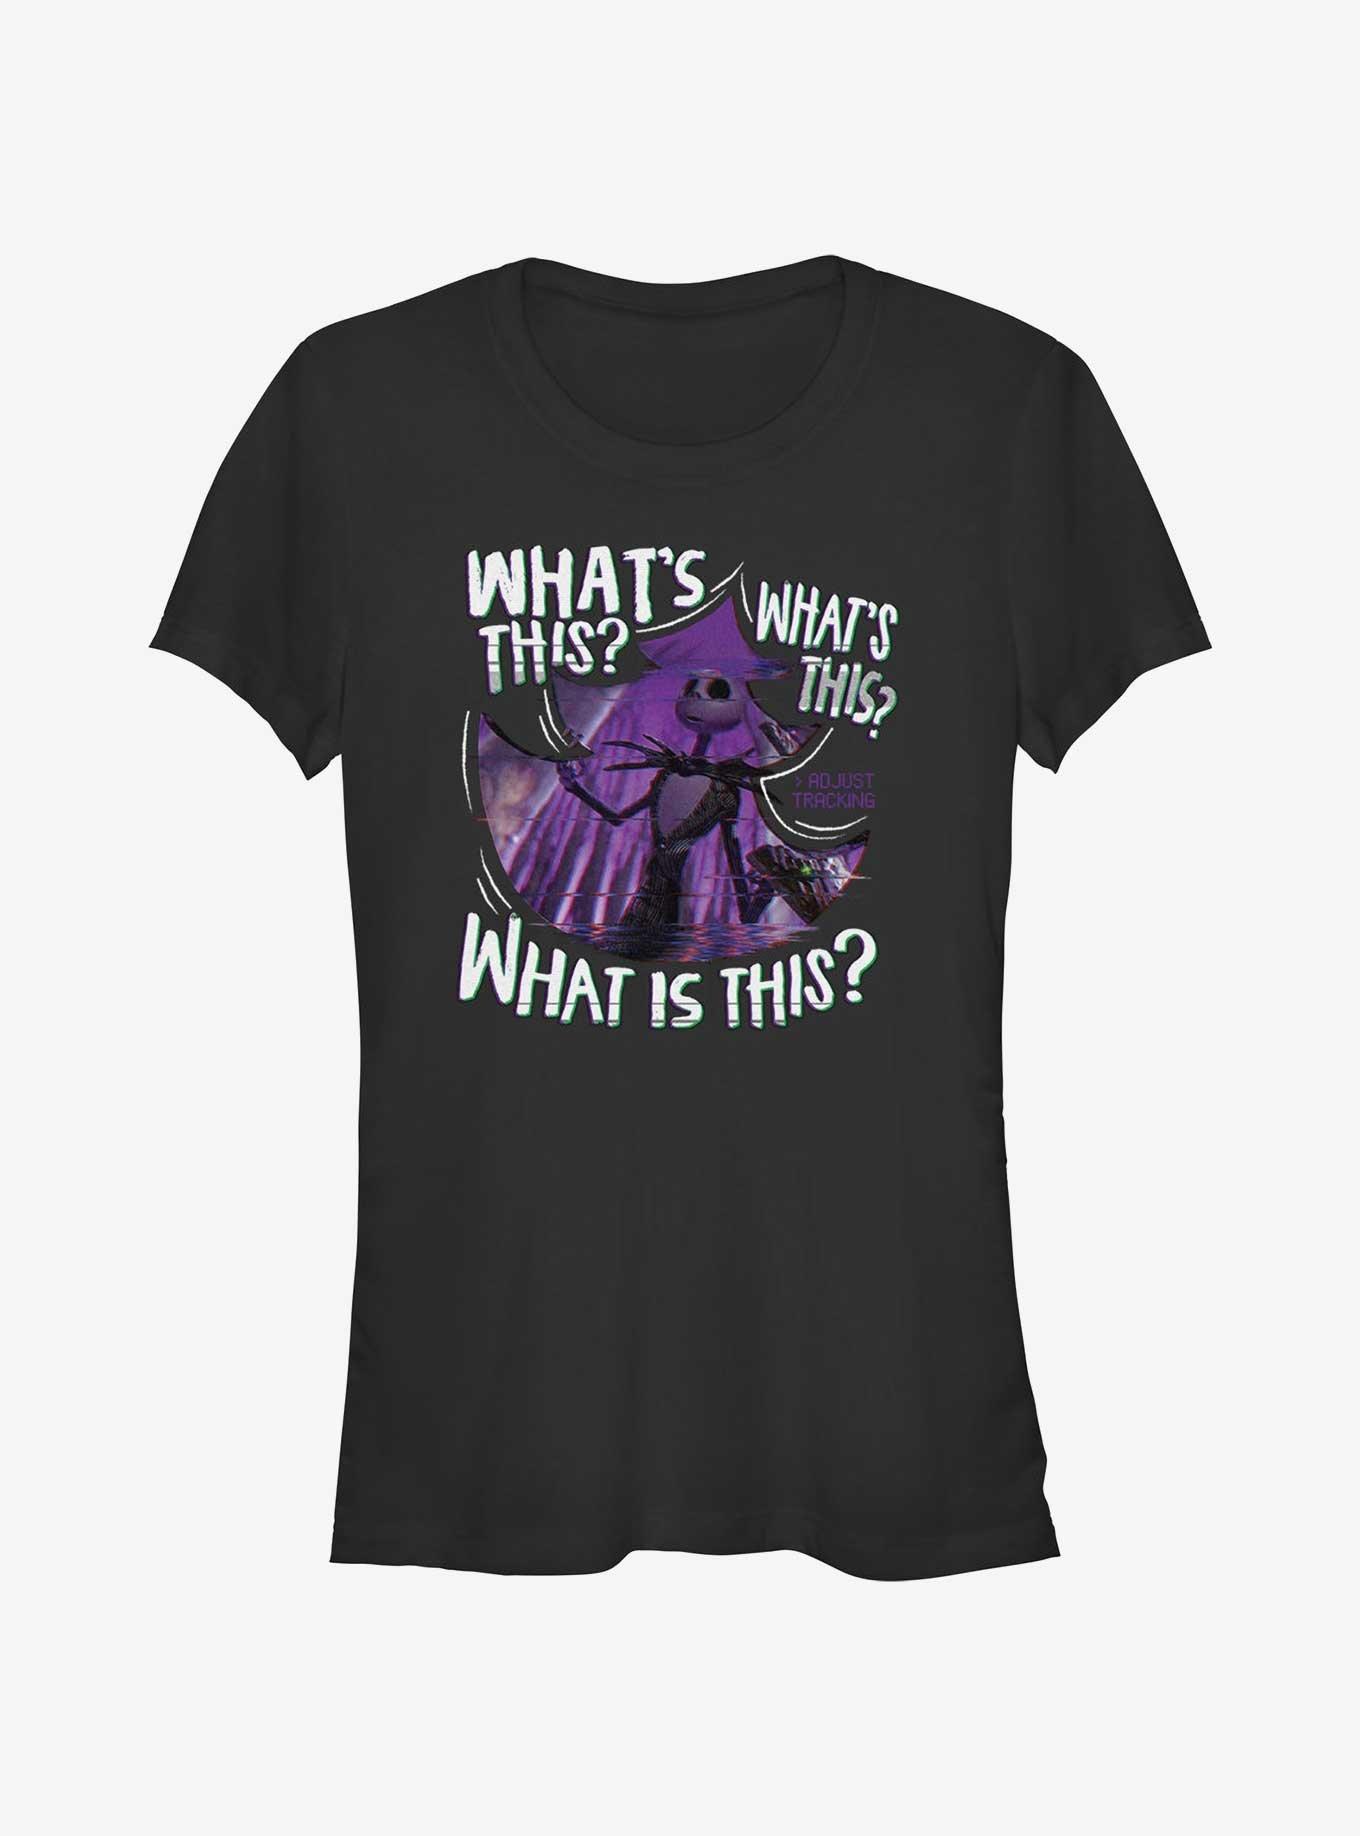 Disney The Nightmare Before Christmas Jack Skellington What's This? Girls T-Shirt, , hi-res